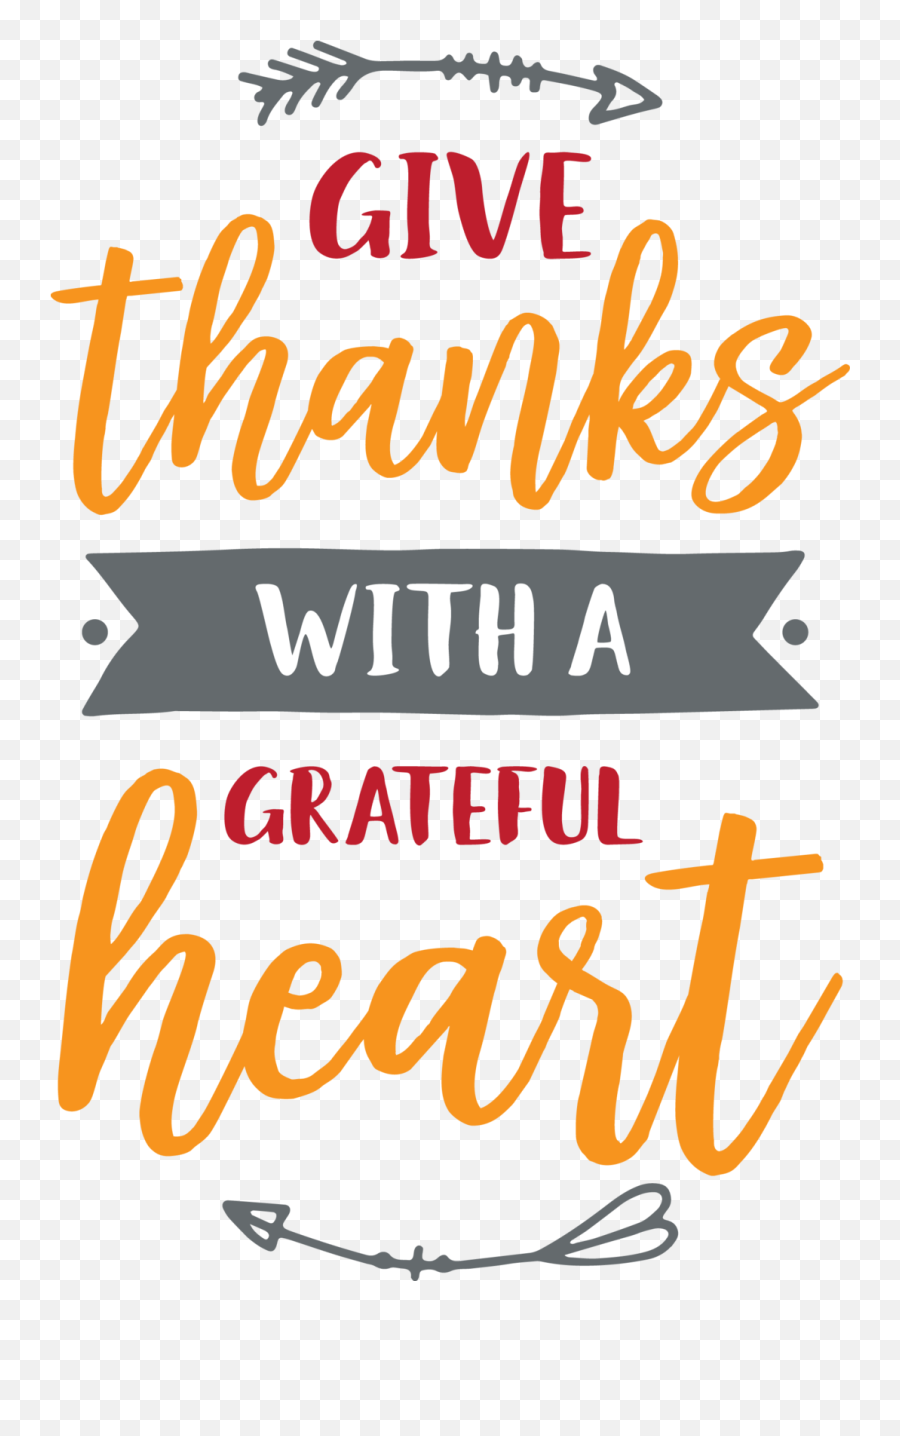 Give Thanks With A Grateful Heart - Give Thanks With A Grateful Heart Transparent Png,Give Thanks Png